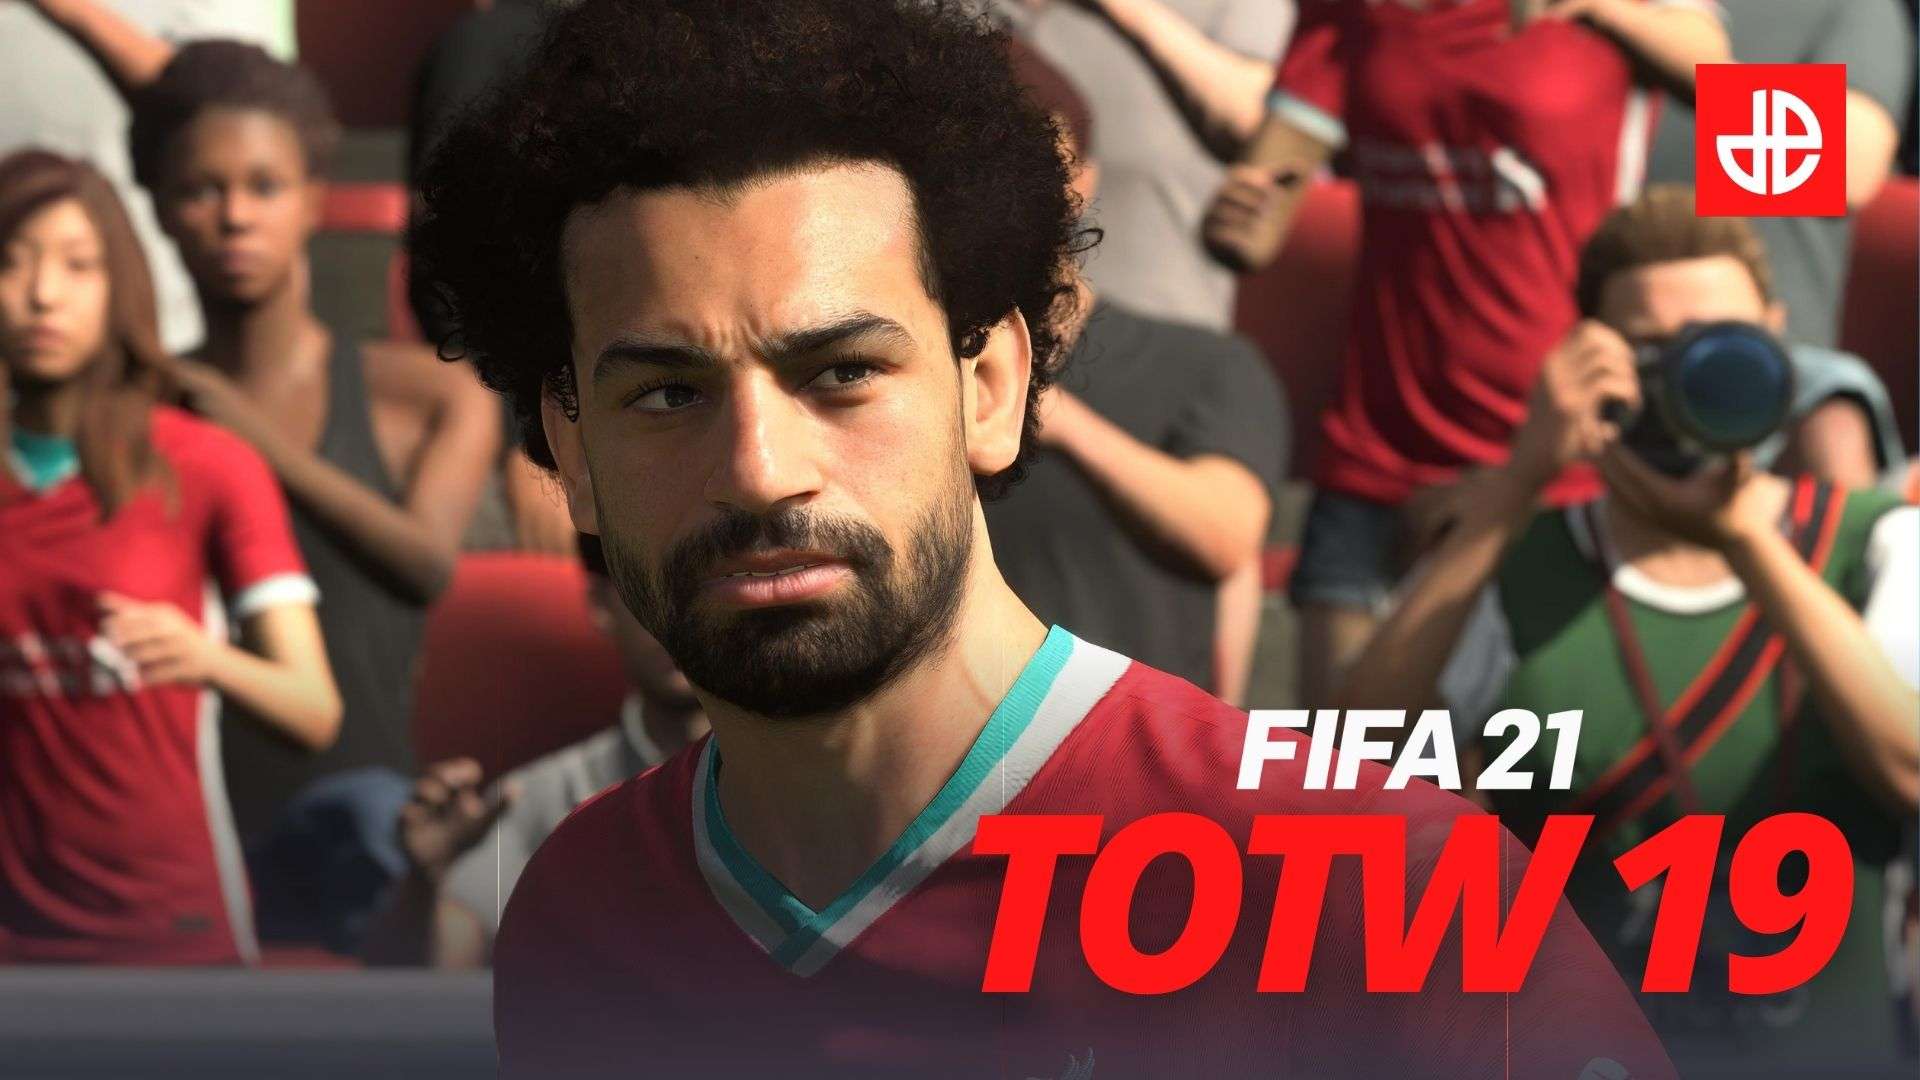 Mohamed Salah playing for Liverpool in FIFA 21 Team of the Week TOTW 19.